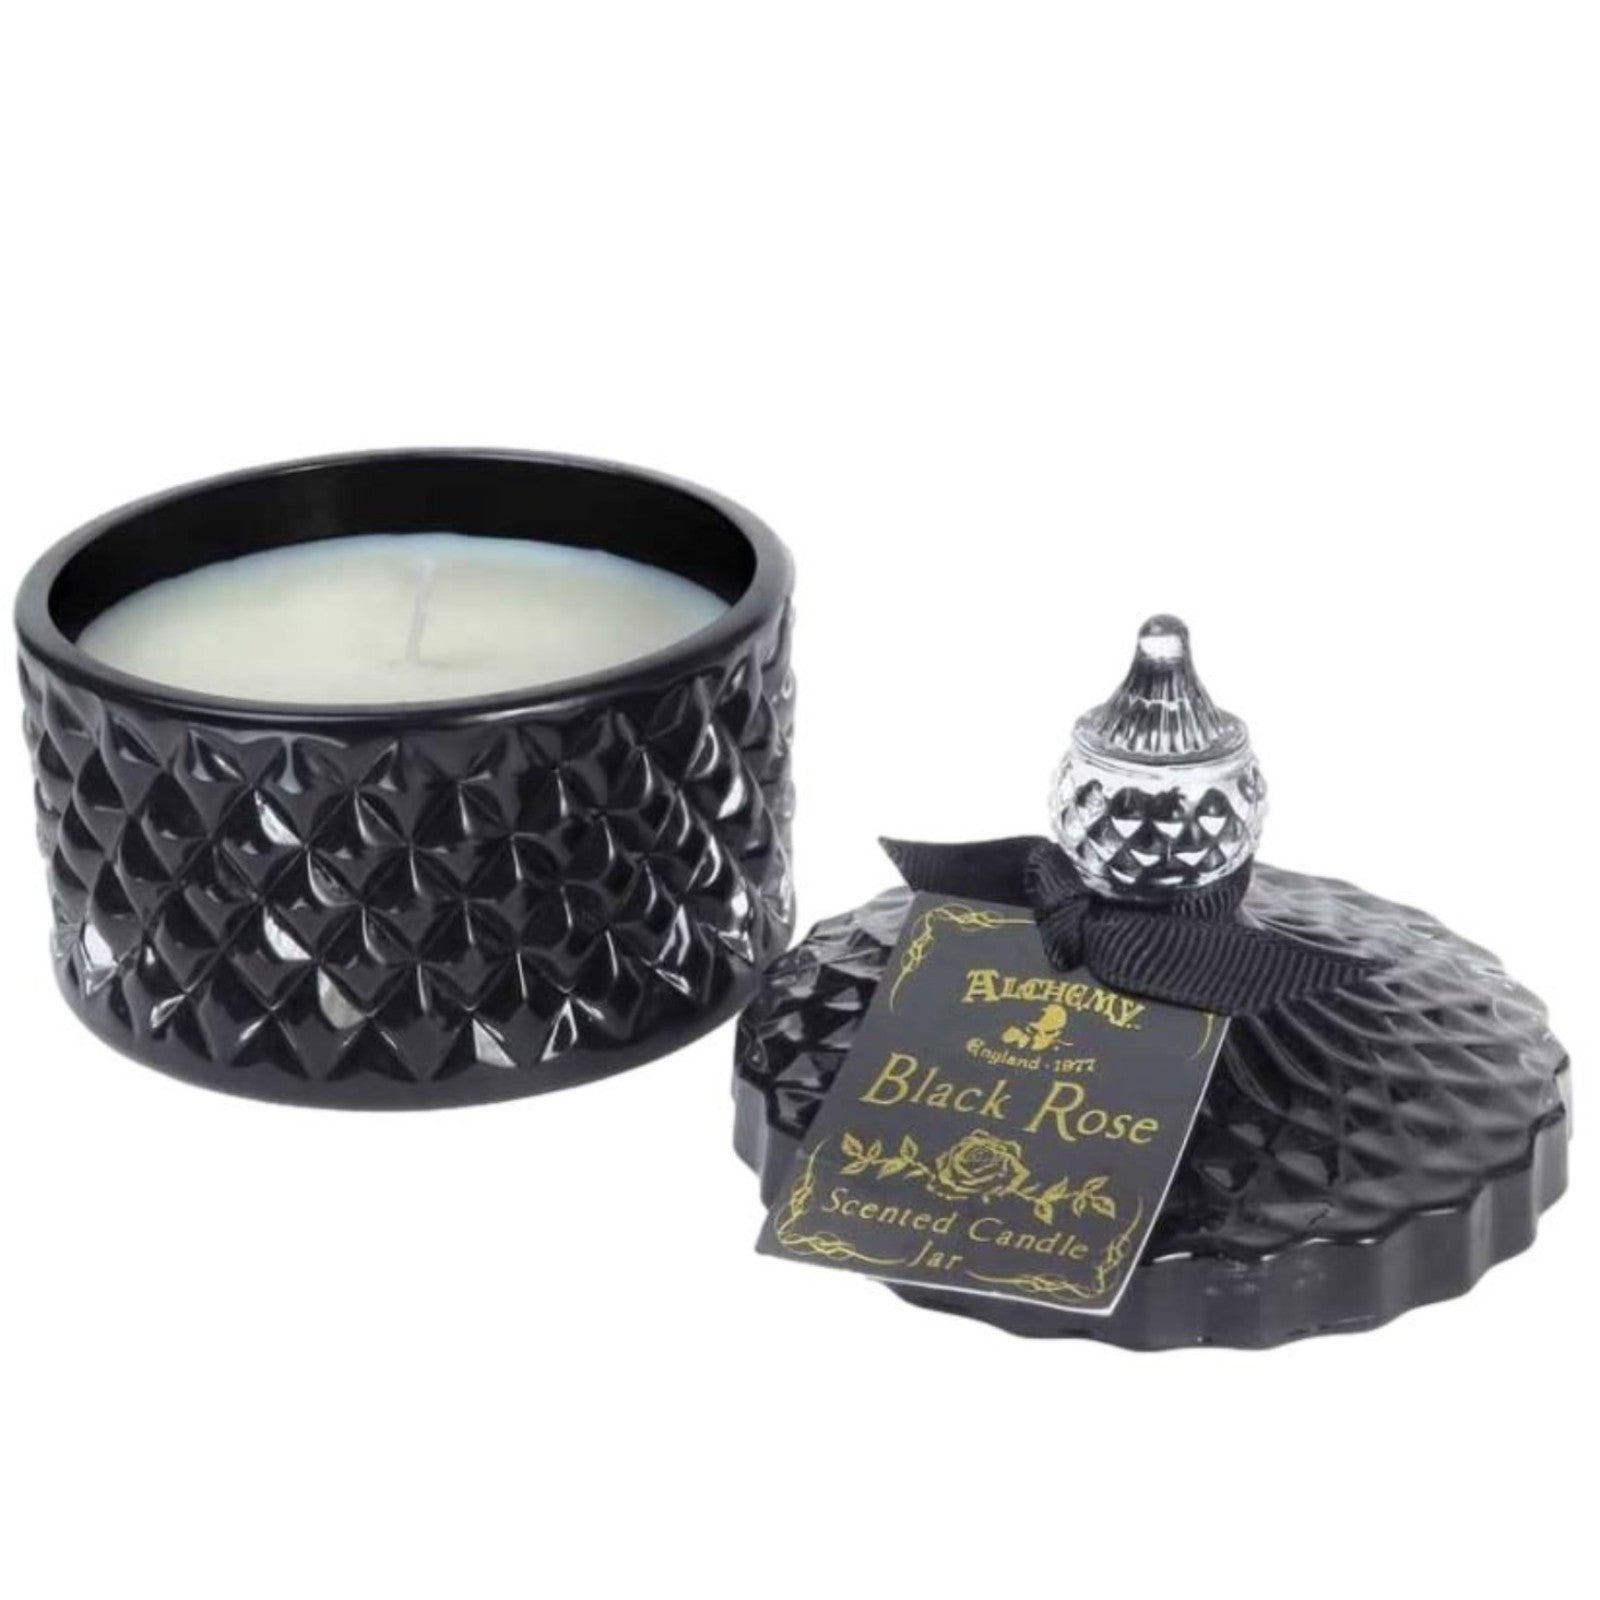 Alchemy England Scented Black Rose Round Candle Jar (Small)